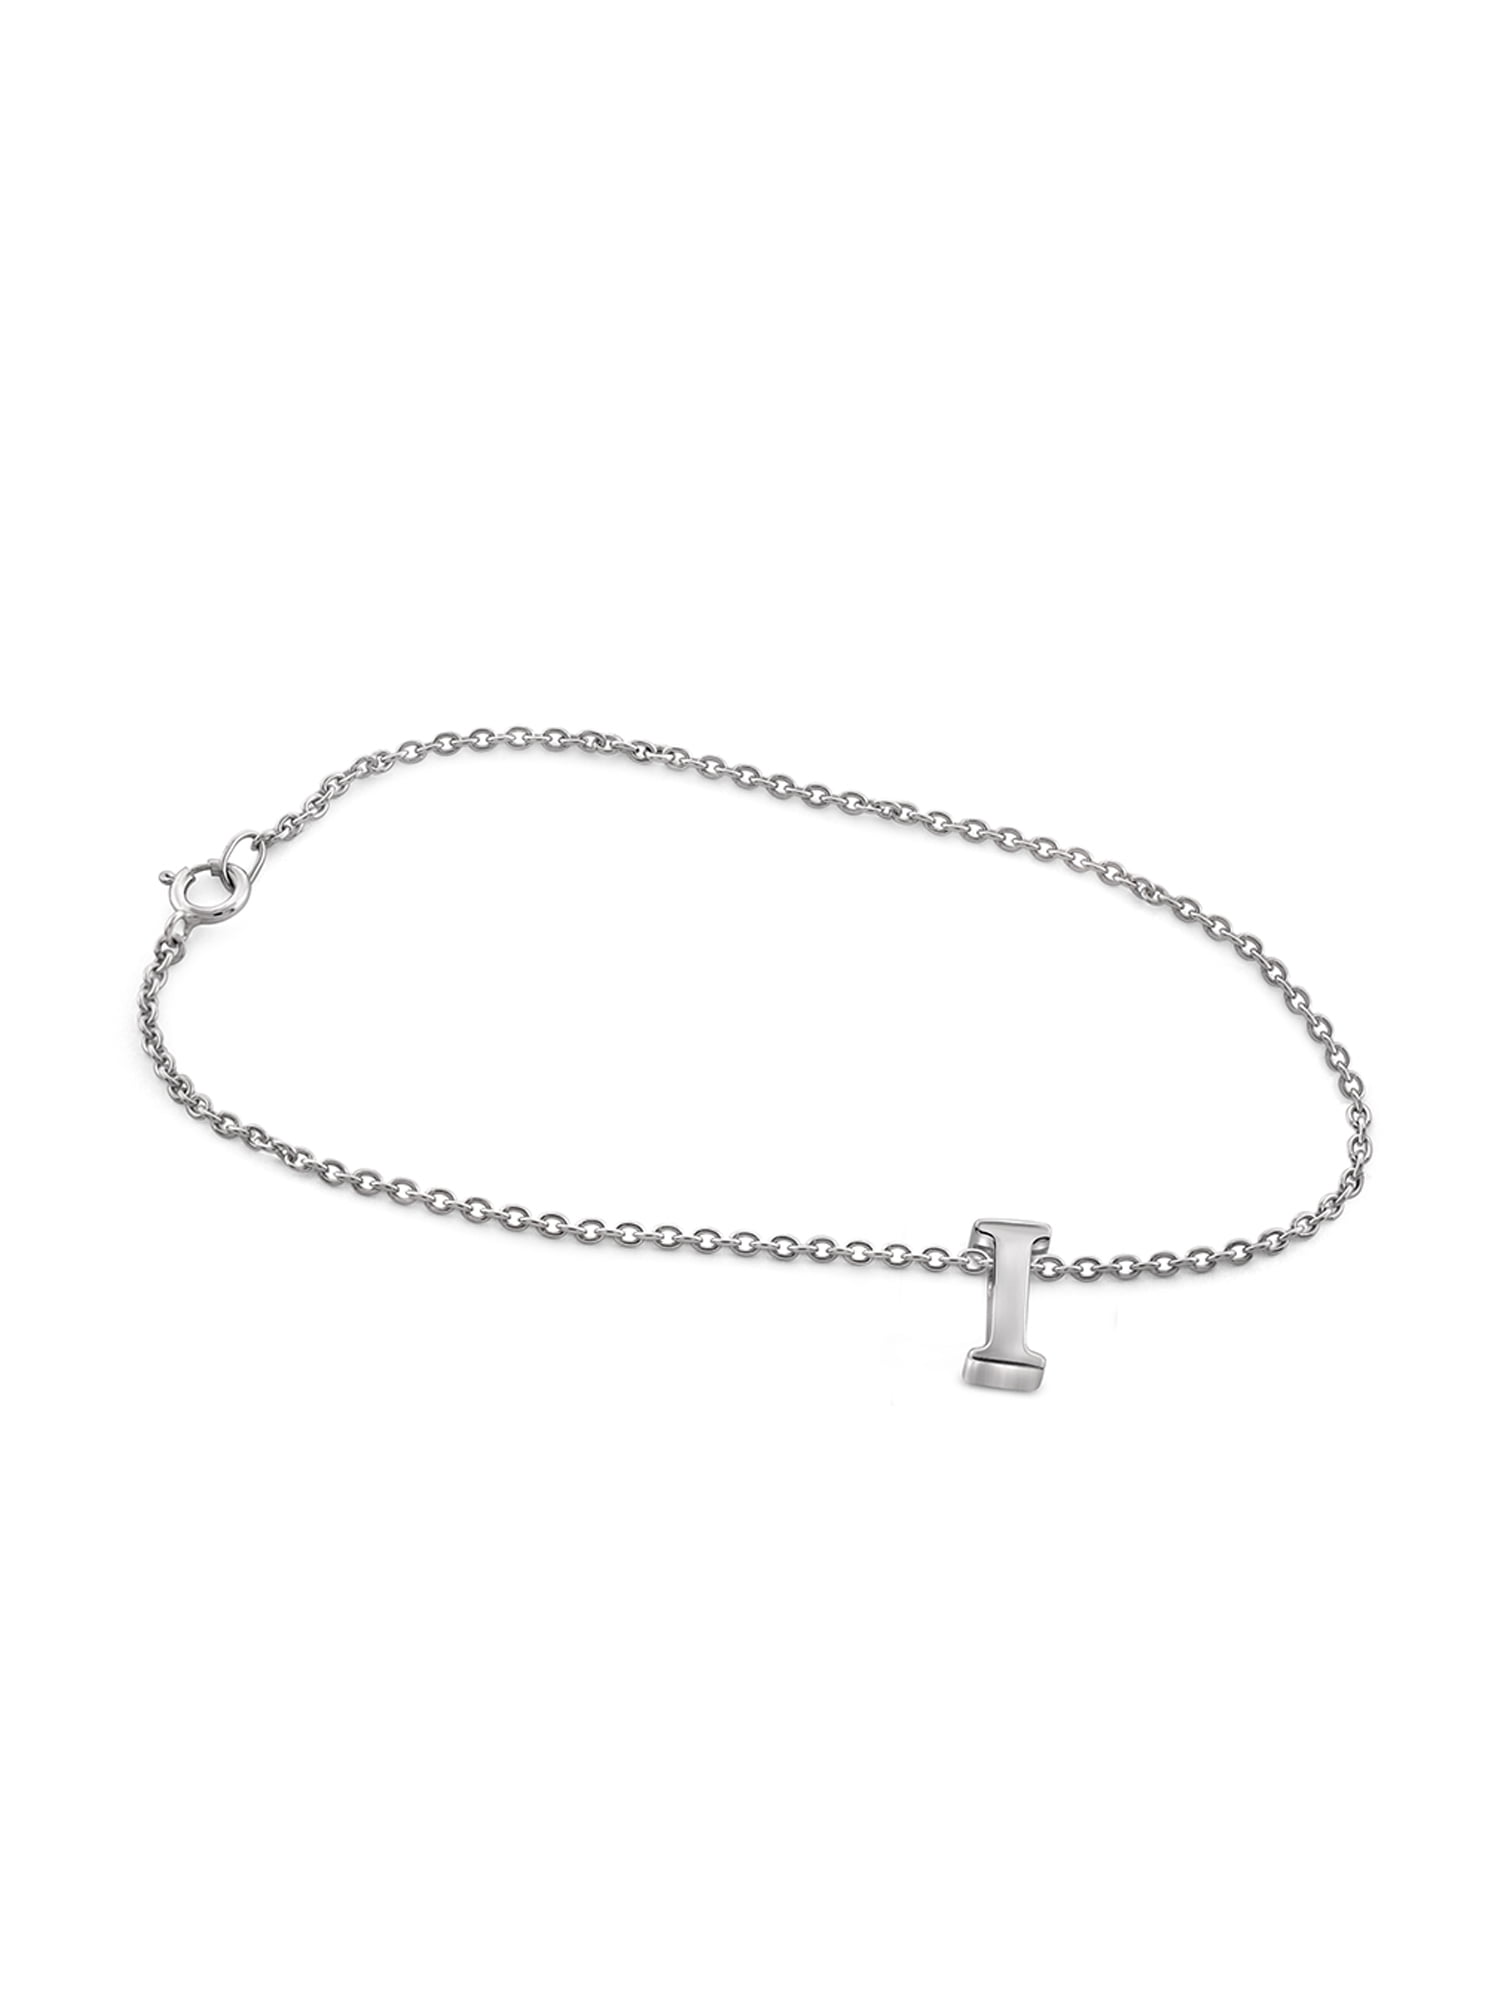 Elsa Peretti® Alphabet bracelet in sterling silver. Letters A-Z available.  | Tiffany & Co.